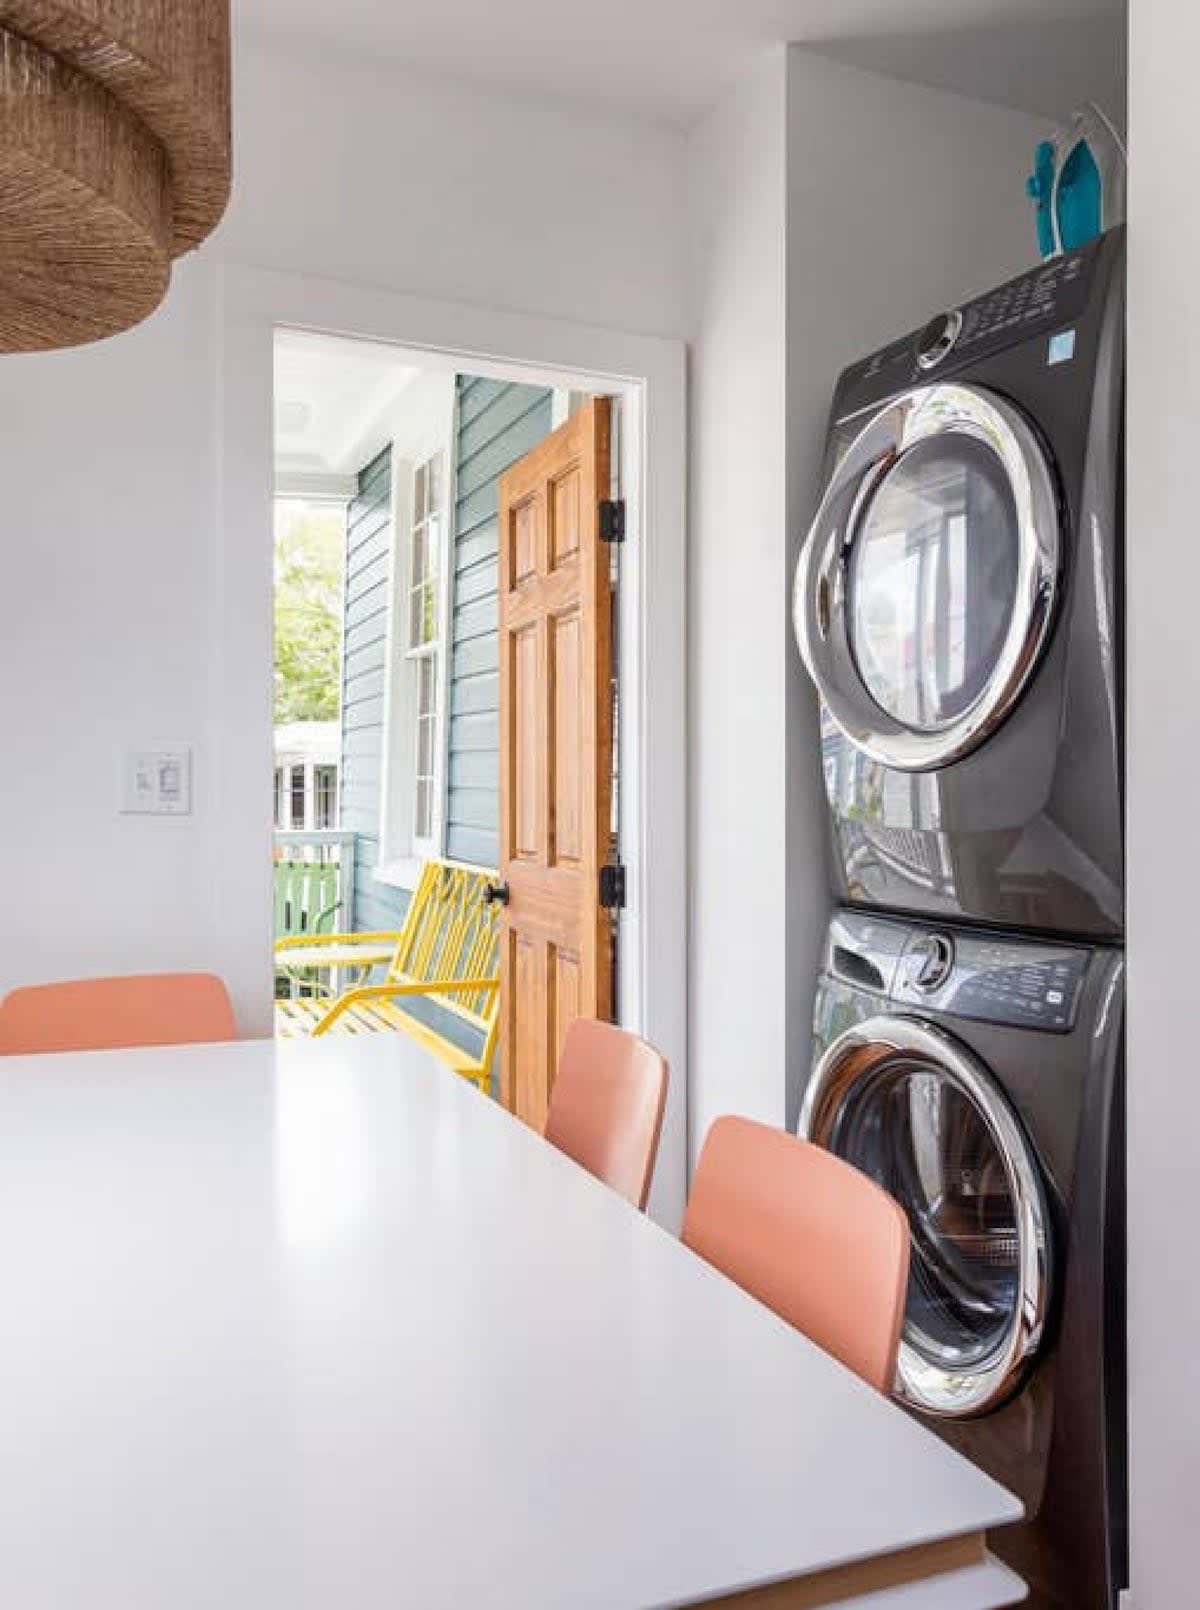 High end Washer and dryer with Steam Capabilities to get those wrinkles out!